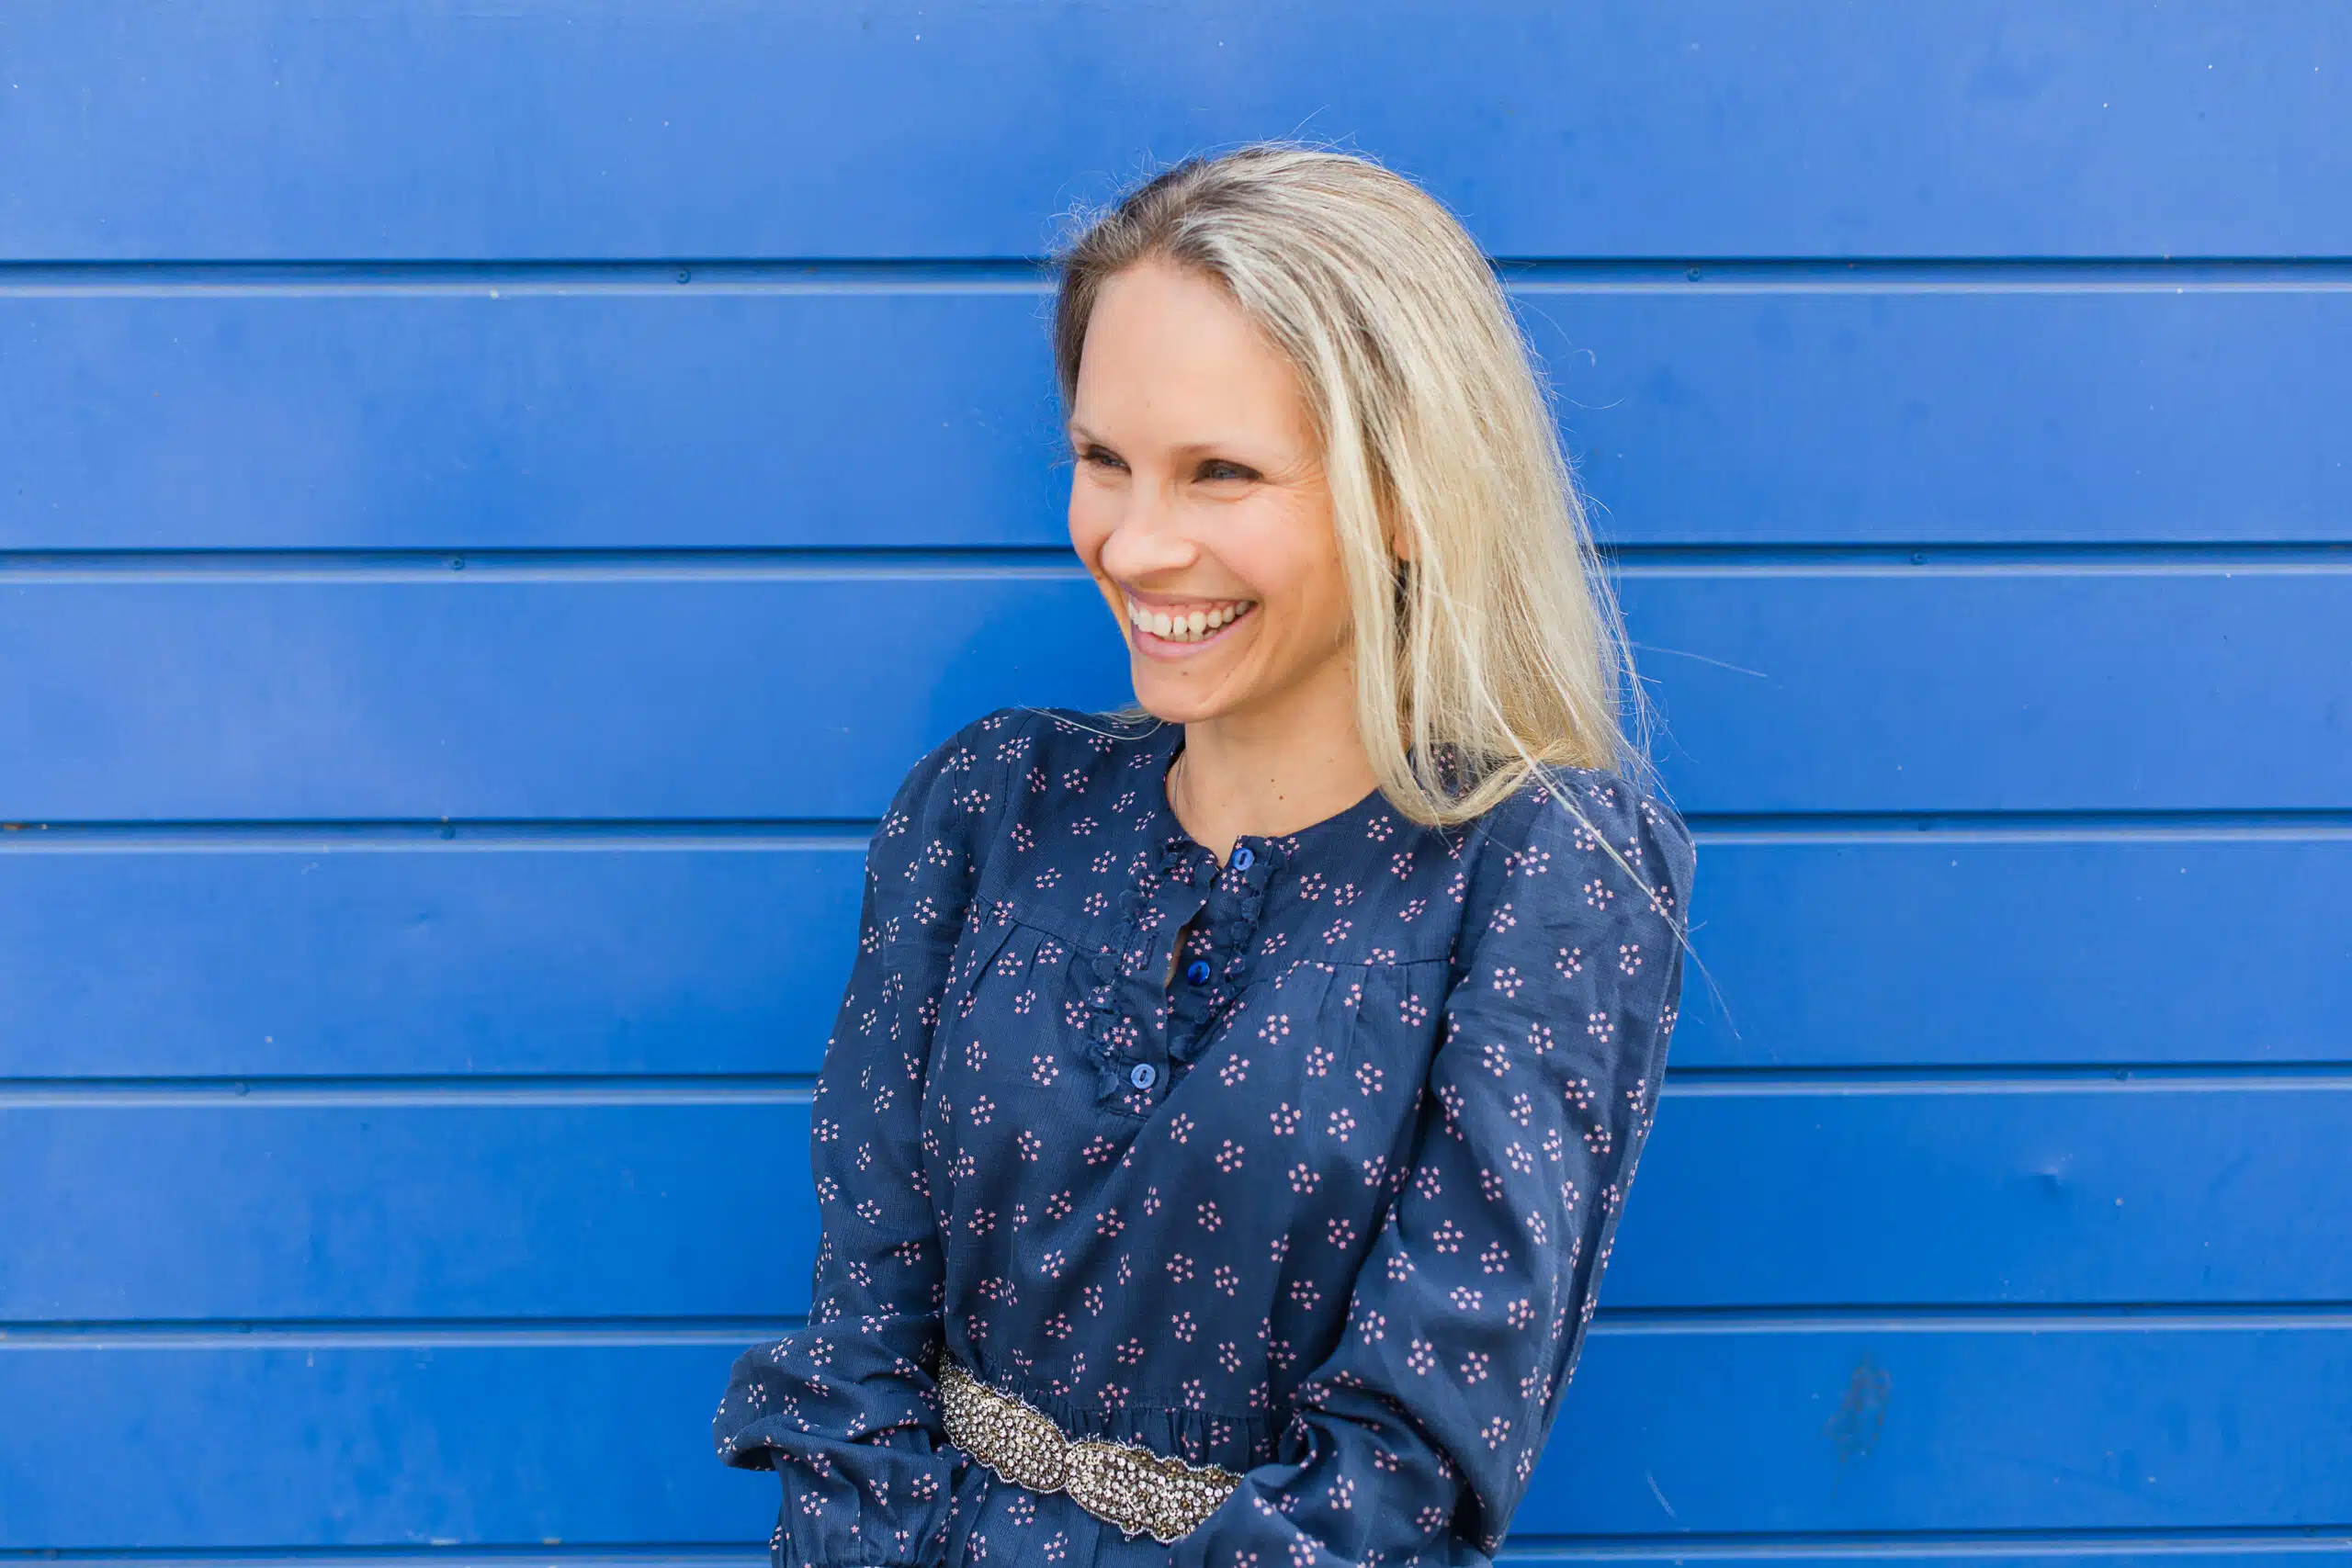 woman in dark blue dress smiling against a bright blue background